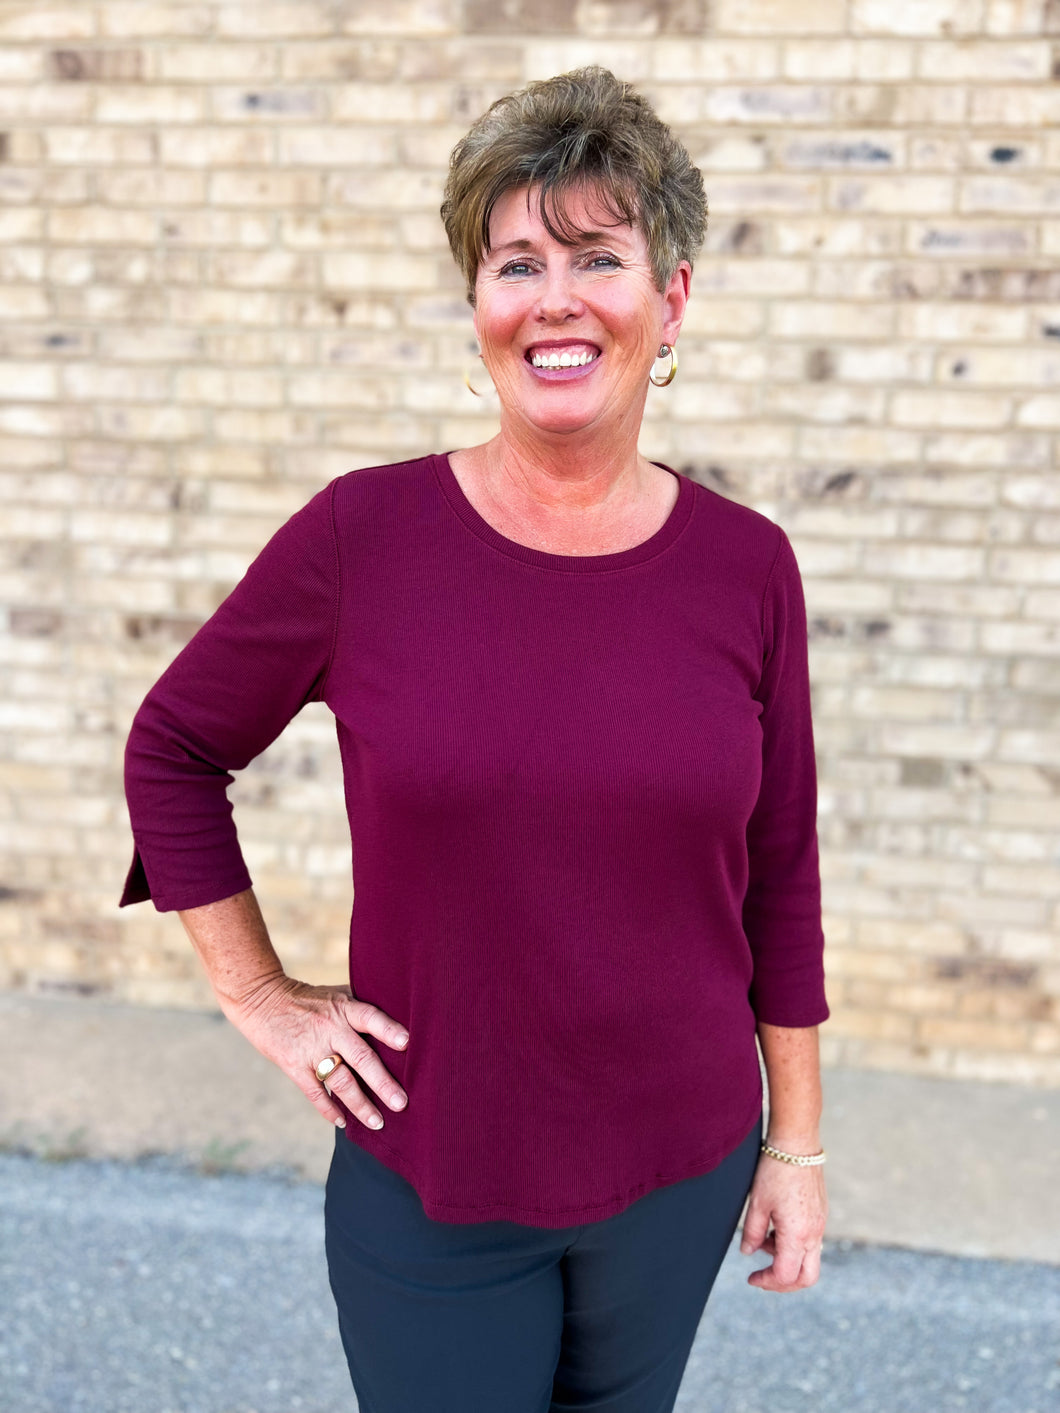 French Dressing Jeans: 3/4 Sleeve Scoop Neck Top Baby Rib in Cabernet